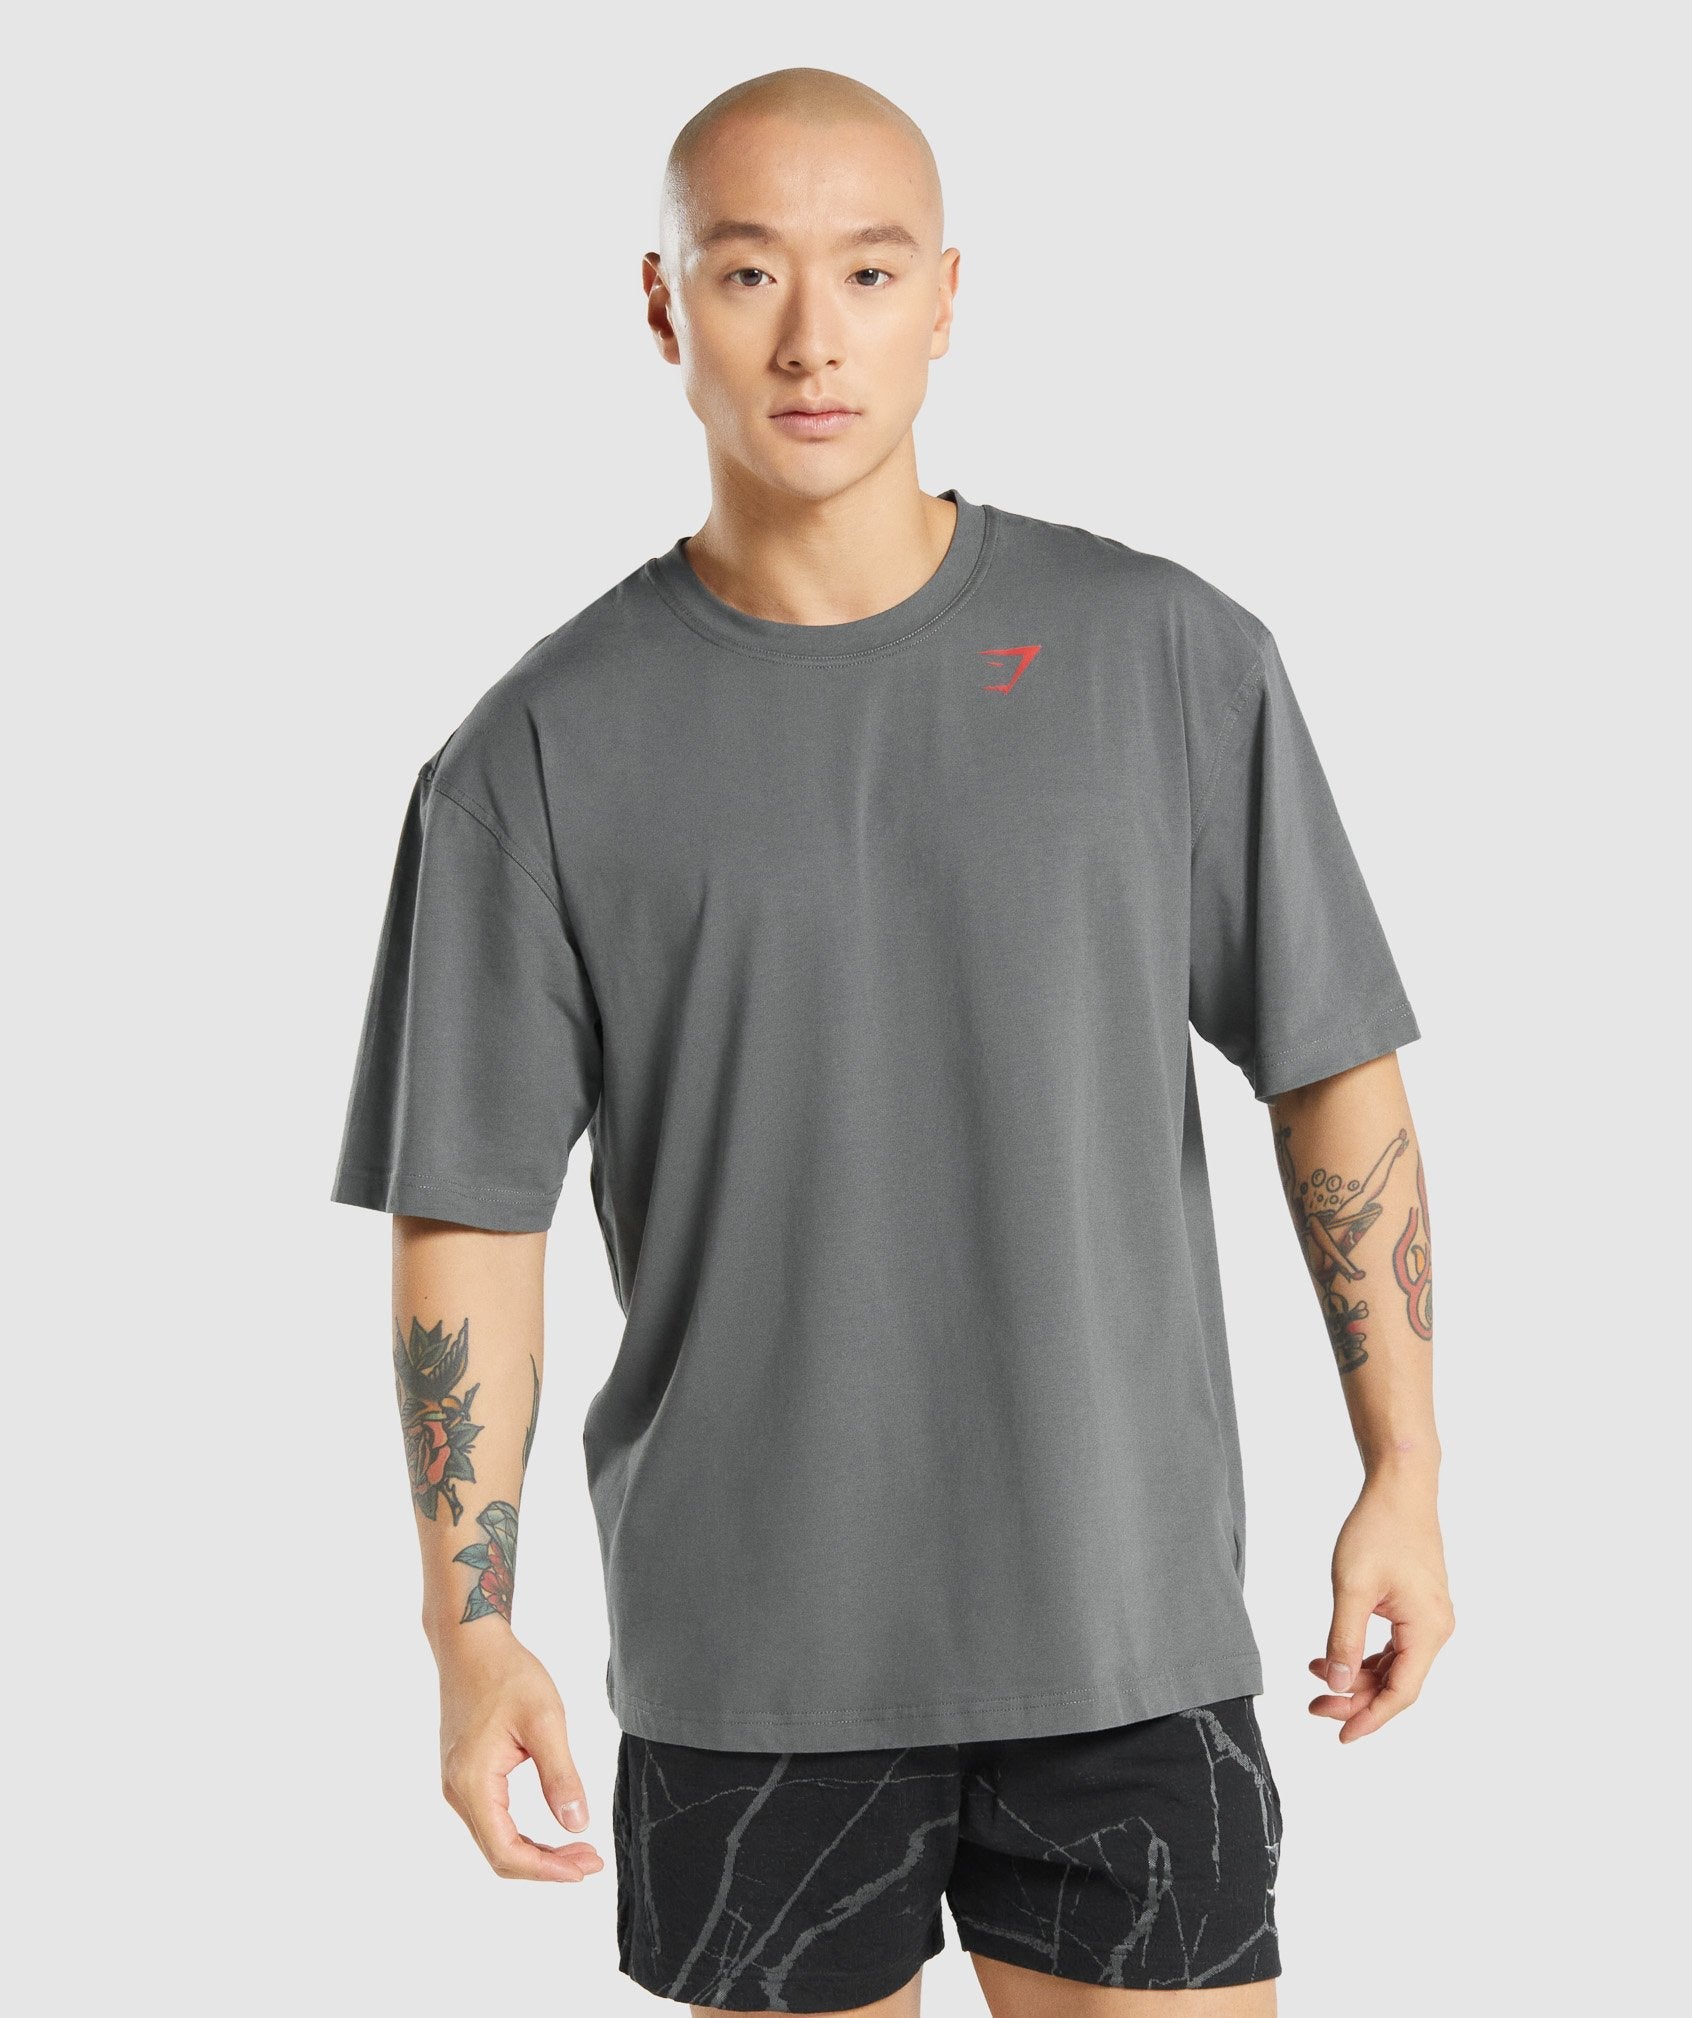 Power T-Shirt in Charcoal Grey - view 1